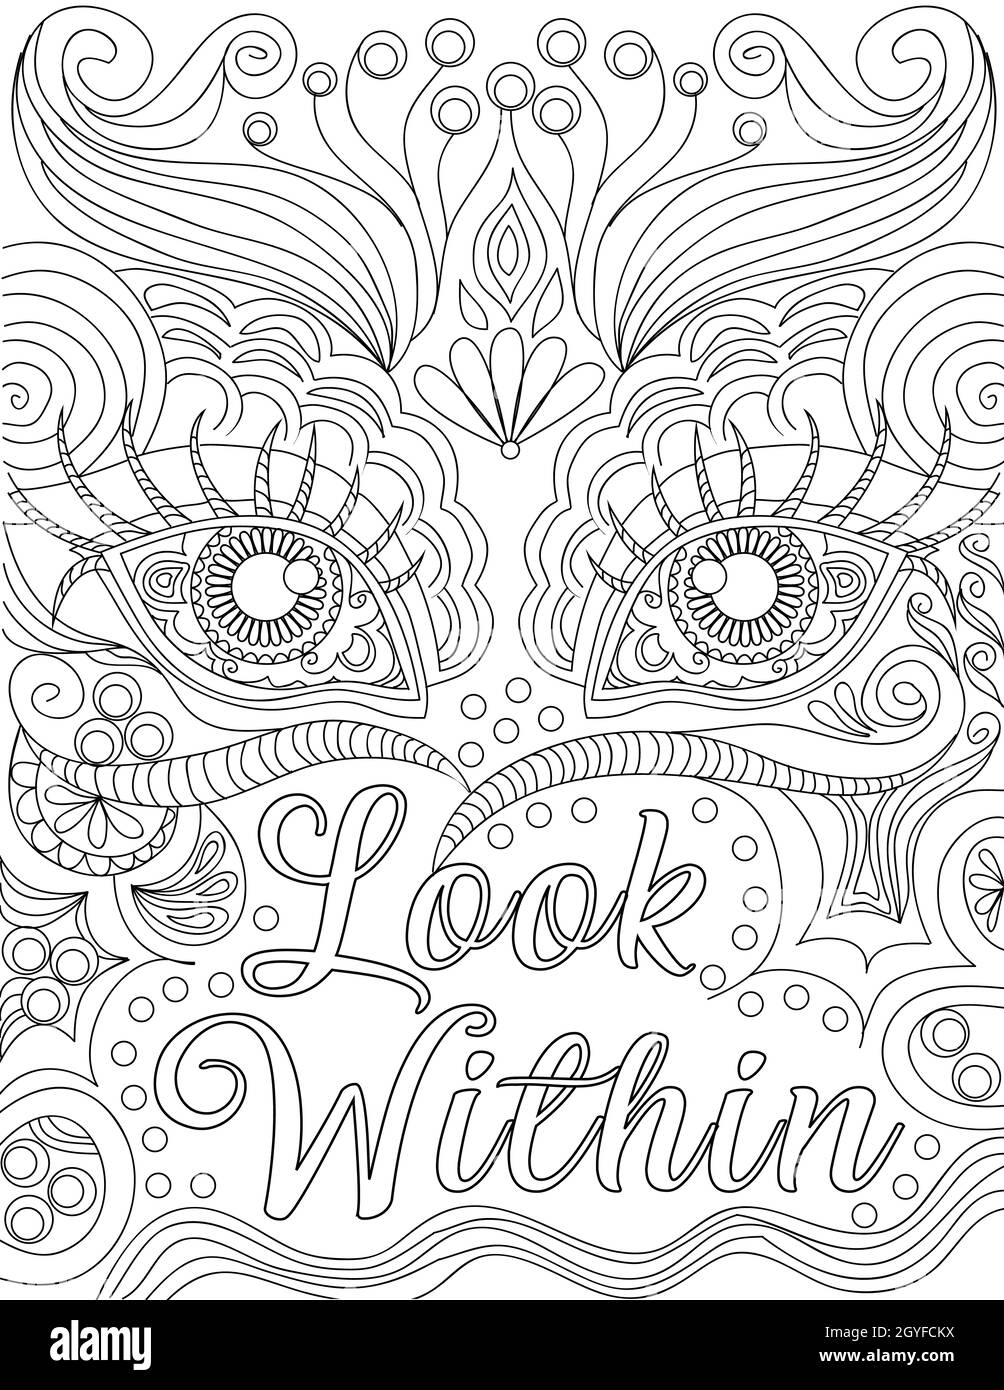 Appealing Eyes Line Drawing Behind The Positive Vibe Message. Stock Photo